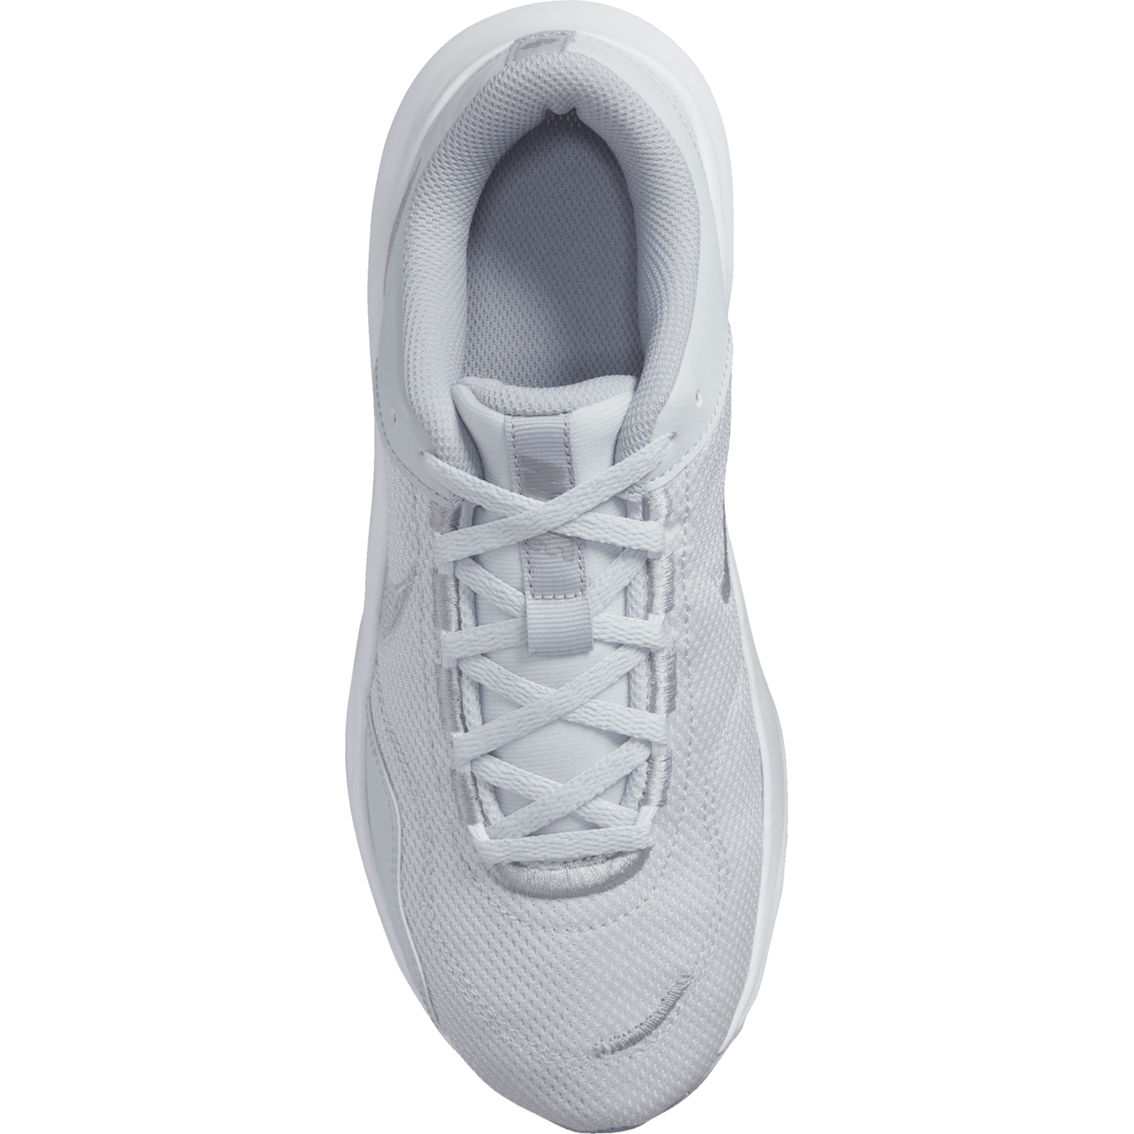 Nike Women's Legend Essential 3 Training Shoes - Image 4 of 8